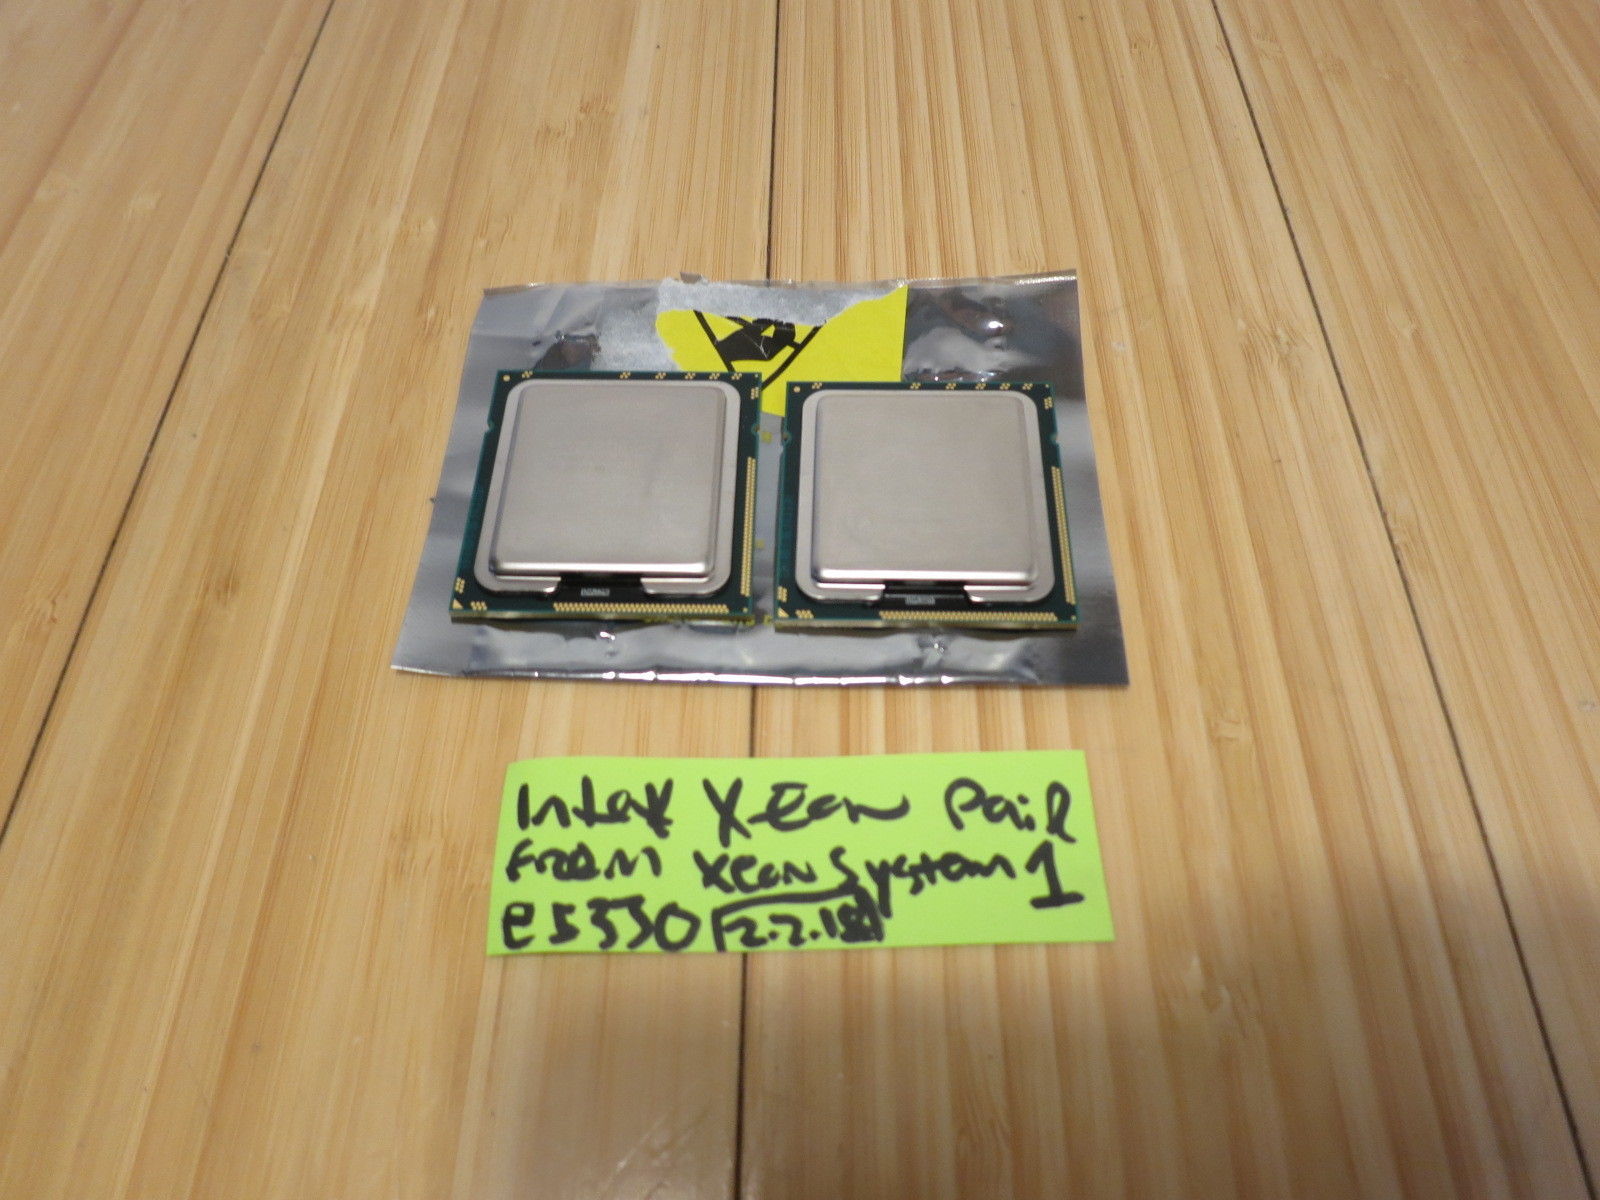 Matched Pair of Intel Xeon E5530 2.4GHz 8MB Quad Core Processor SLBF7 (3 of 4) - £14.75 GBP